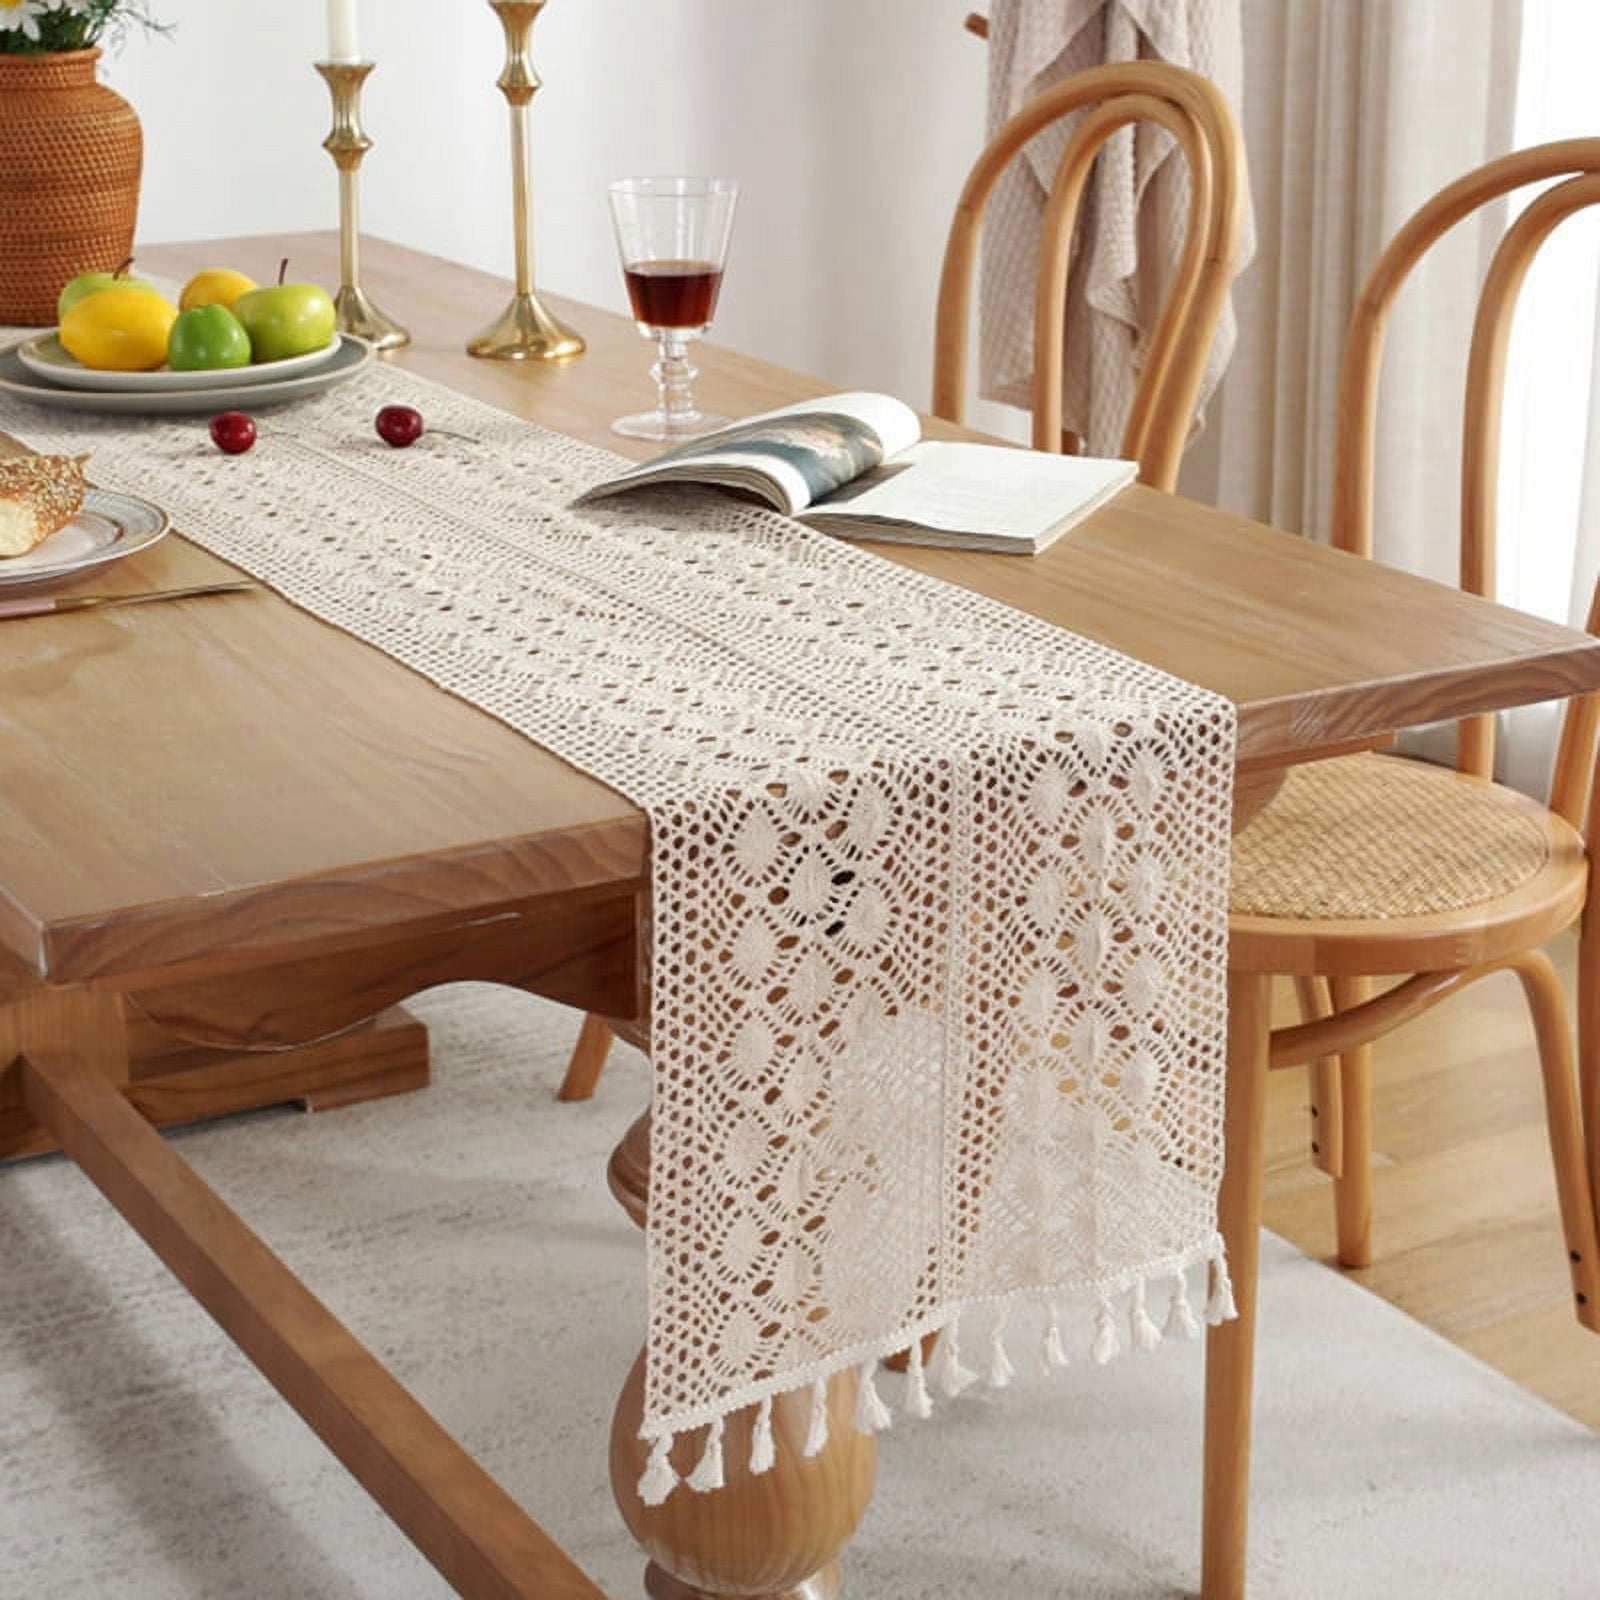 Knitted Table Runner - Savvy Apron